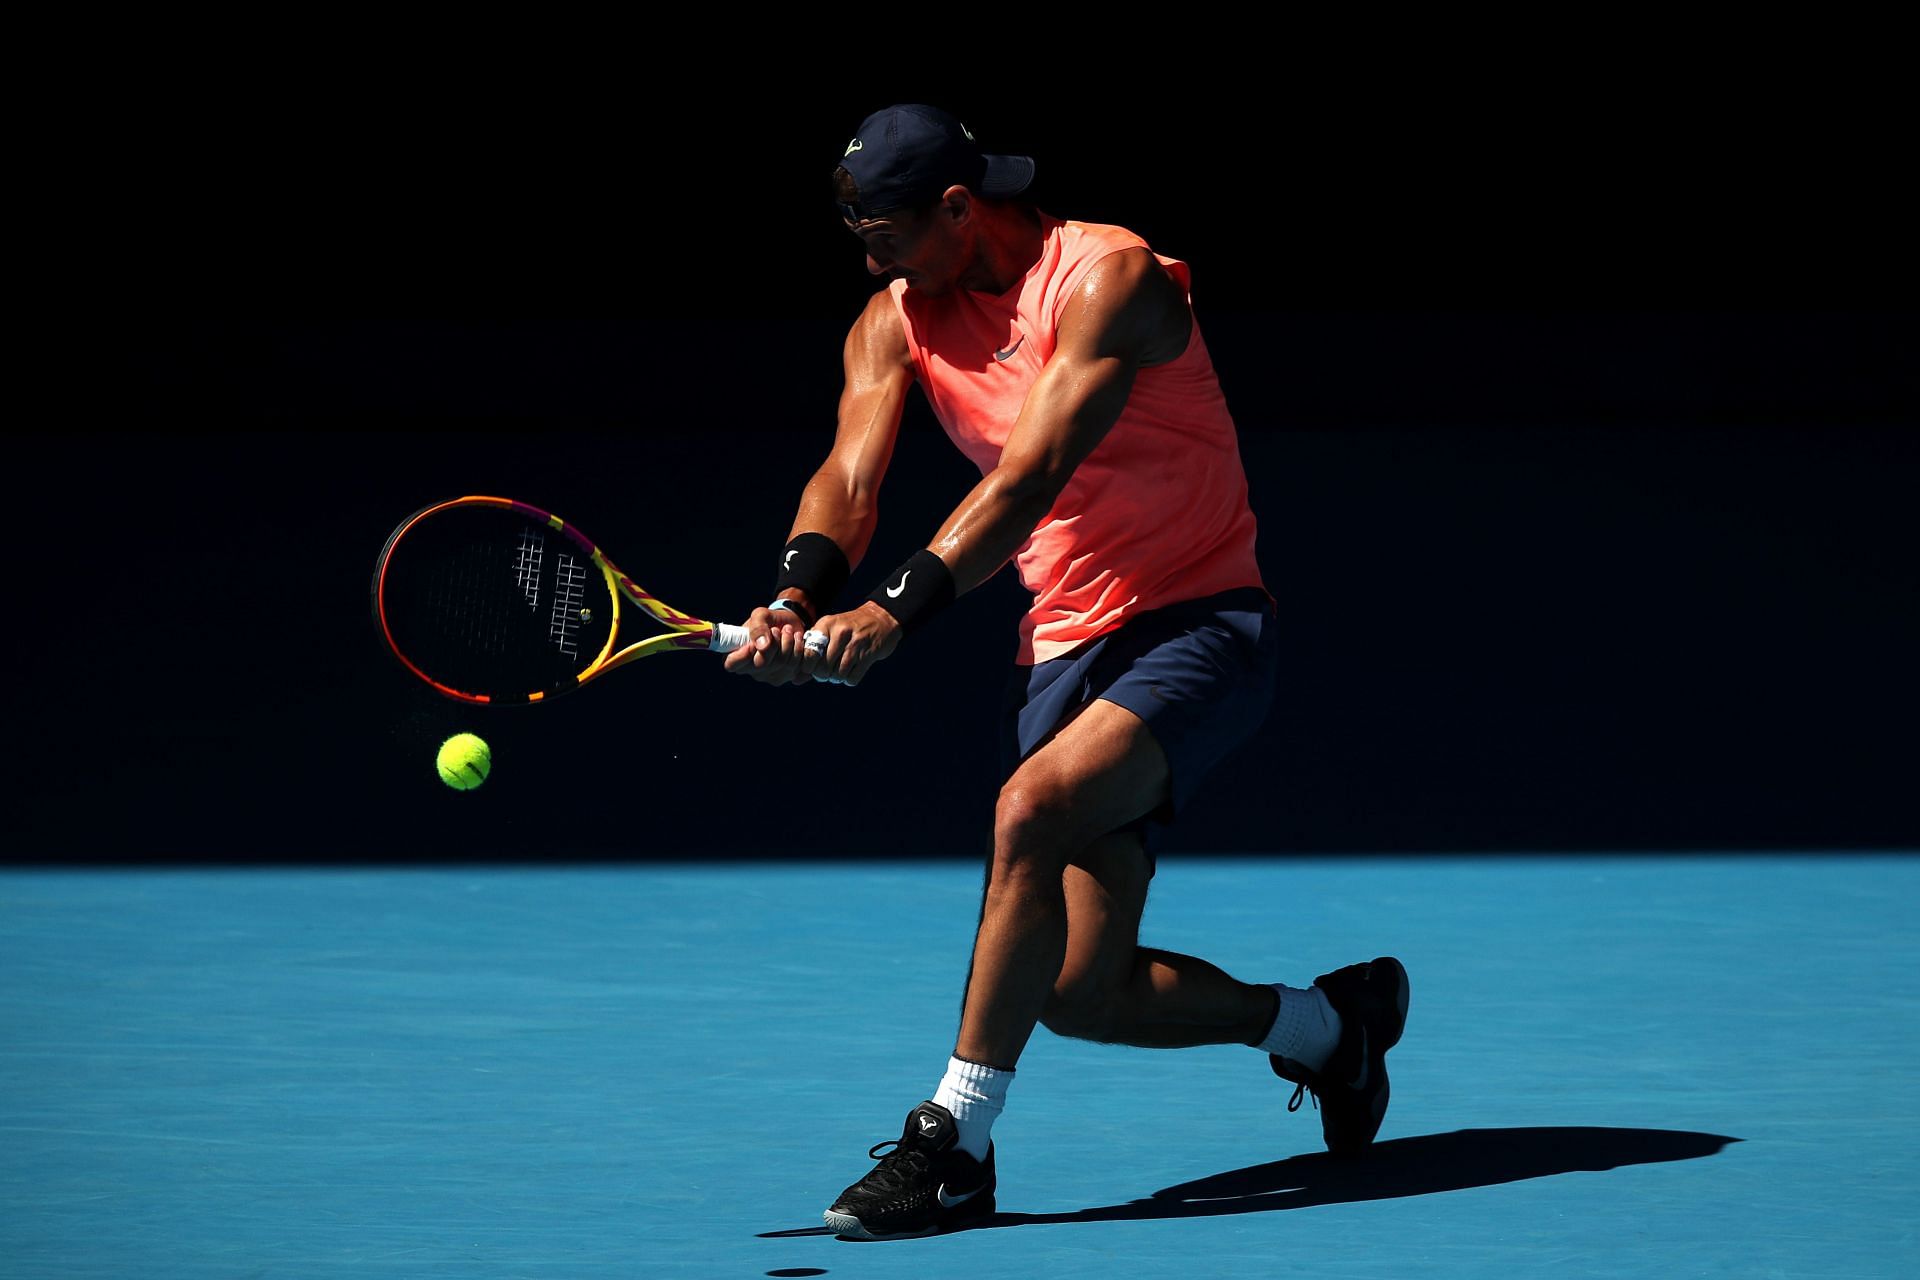 Nadal could face Alexander Zverev in the quarterfinals of the Australian Open